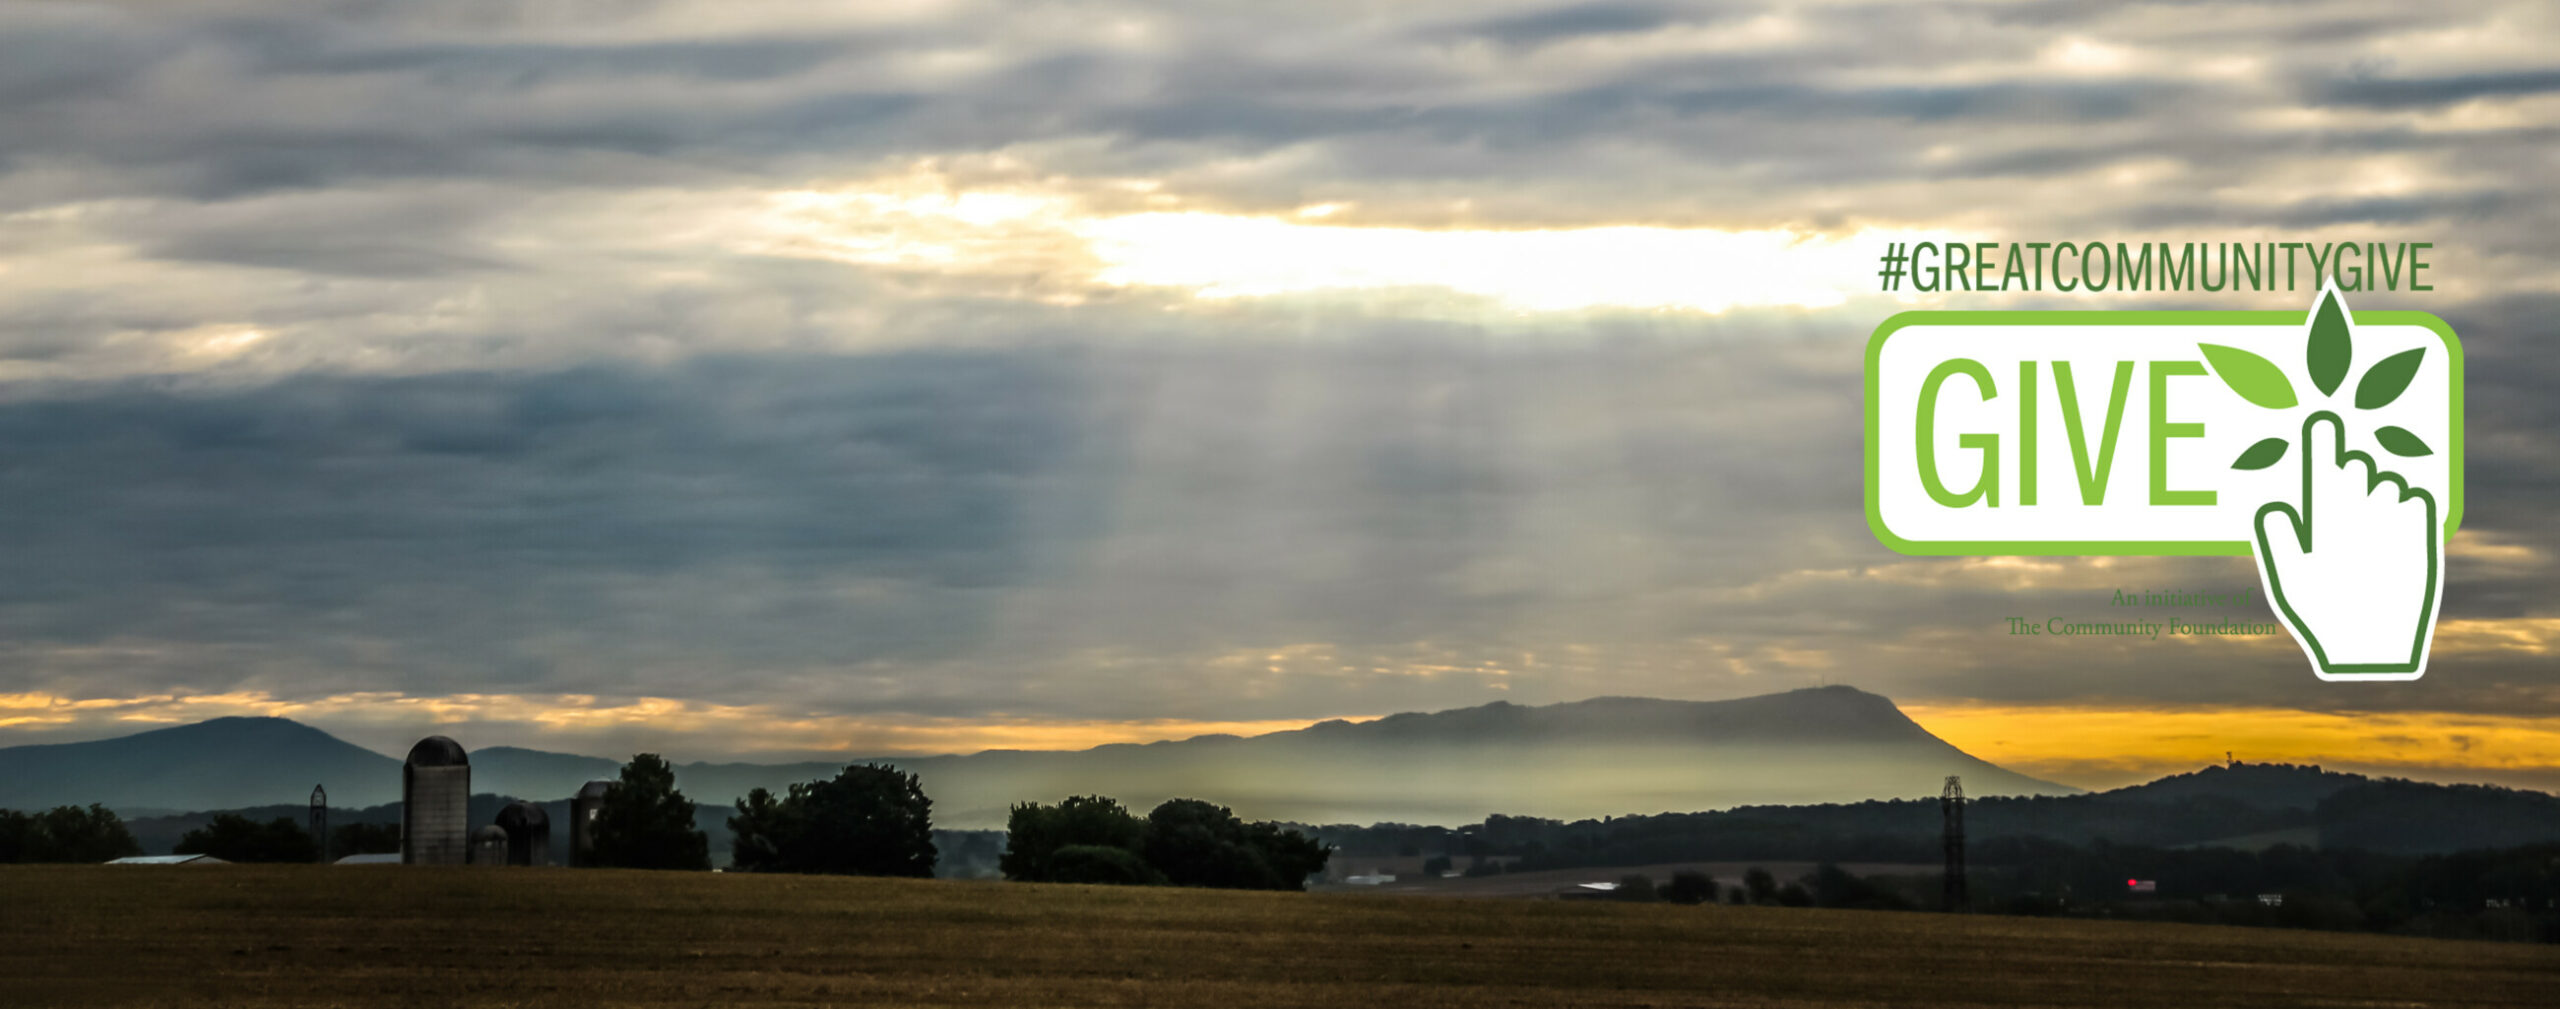 Sun shines through the clouds over the iconic Massanutten Mountain with farm fields in the foreground.